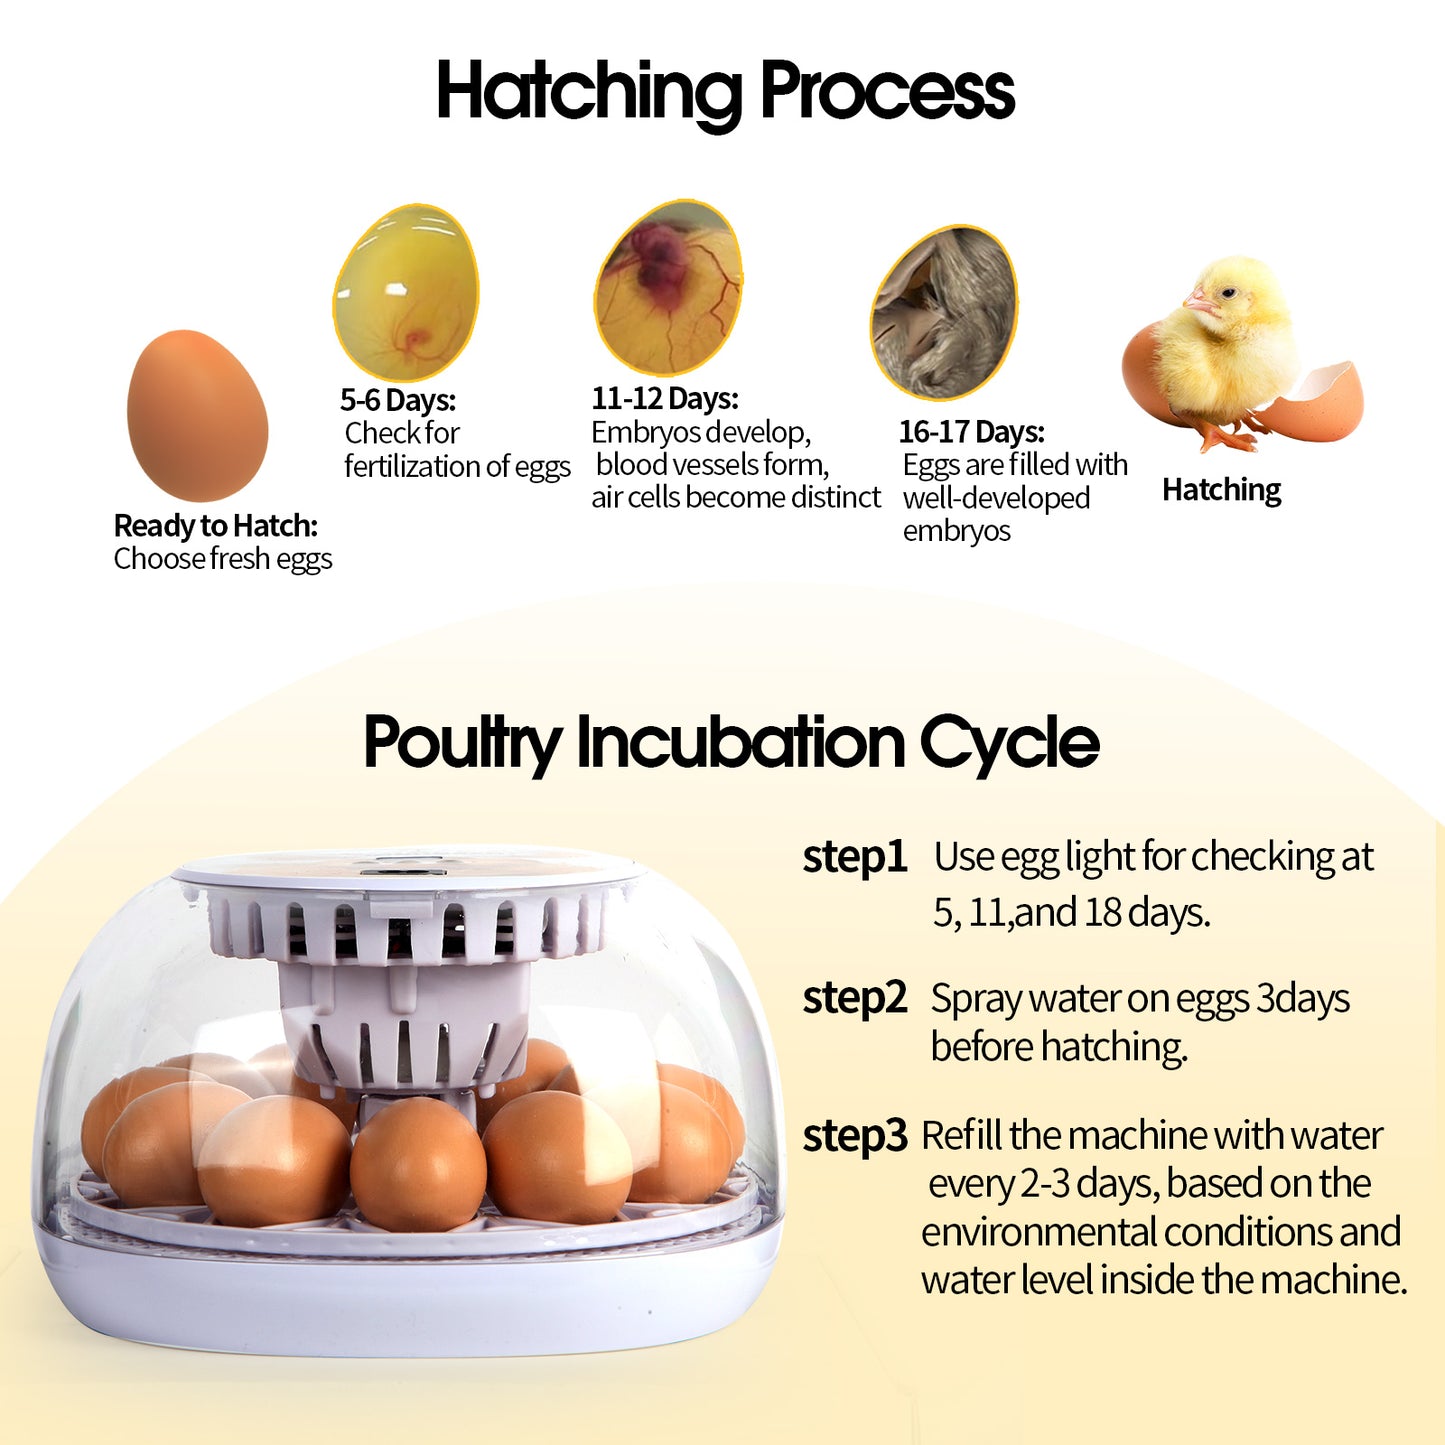 ZEMIRO CHARGE 12 Eggs Incubator for Hatching Eggs with Automatic Egg Turner, Temperature Control, Automatic Water Adding for Hatching Chicken, Goose, Duck, Quail, Pigeon, and Turkeys